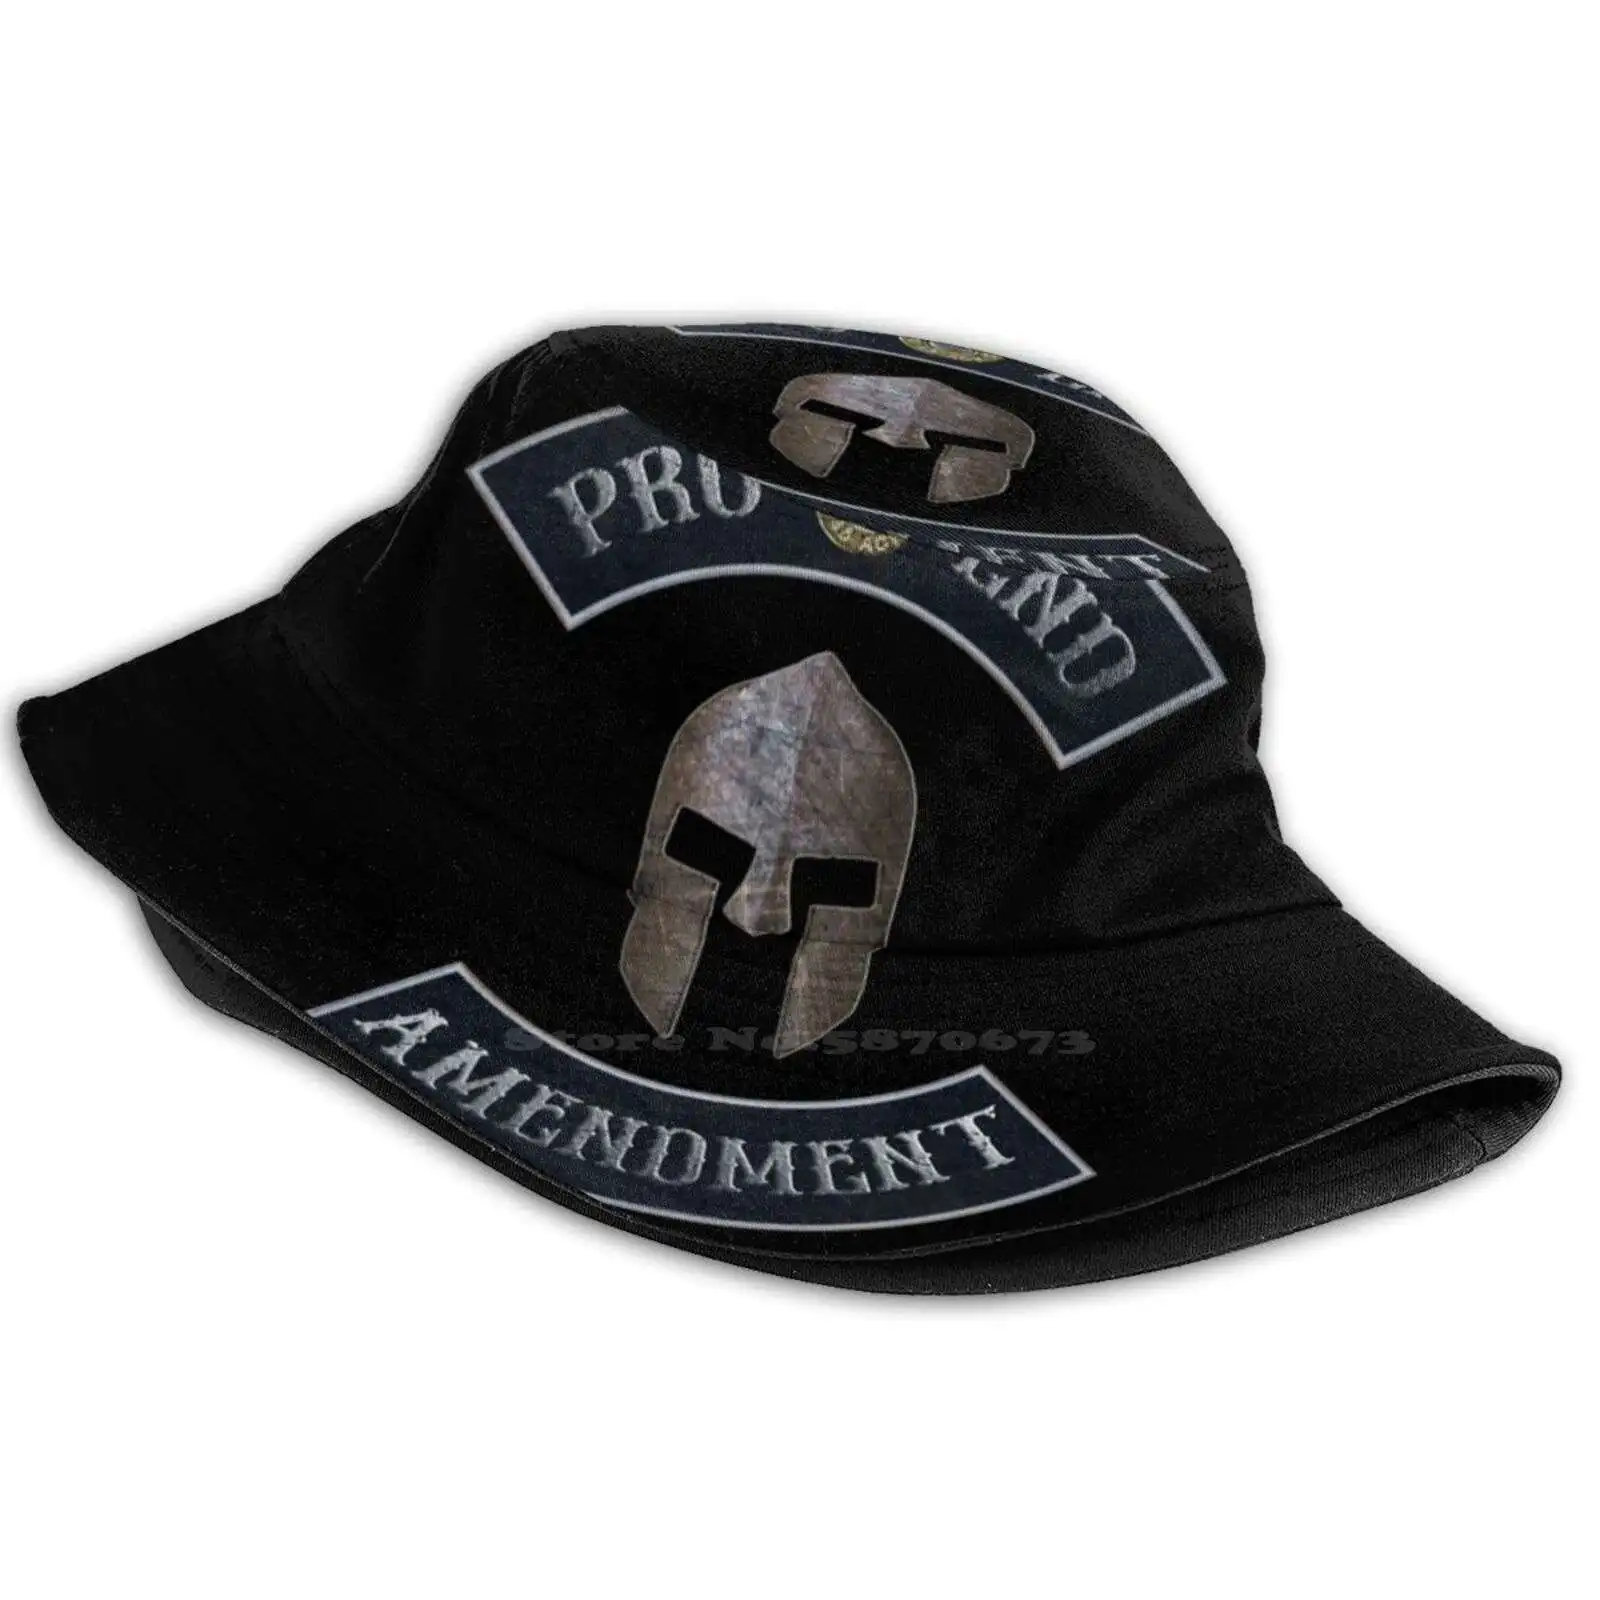 

Pro 2Nd Amendment In Rockers With Helmet With Black Background Fishing Hunting Climbing Cap Fisherman Hats Pro 2A Molon Labe